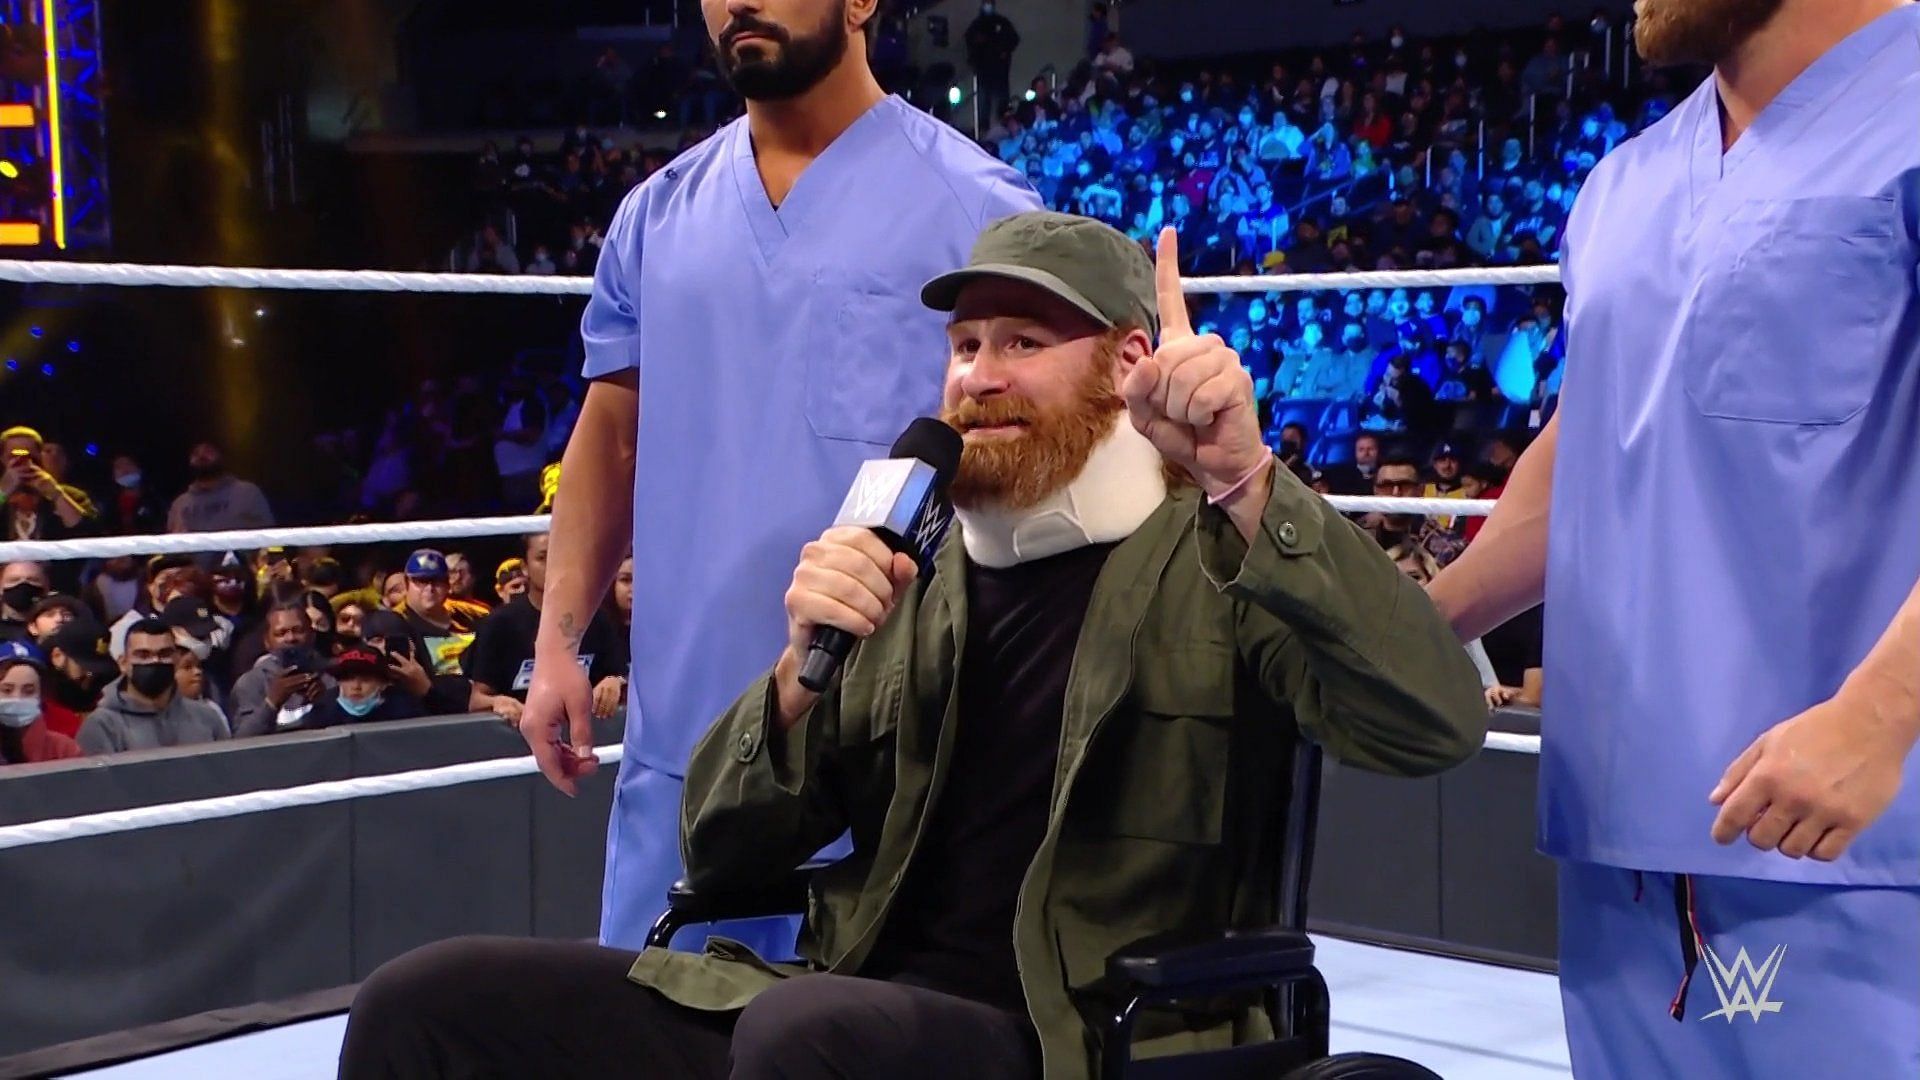 Sami Zayn claimed to be the toughest man alive on SmackDown